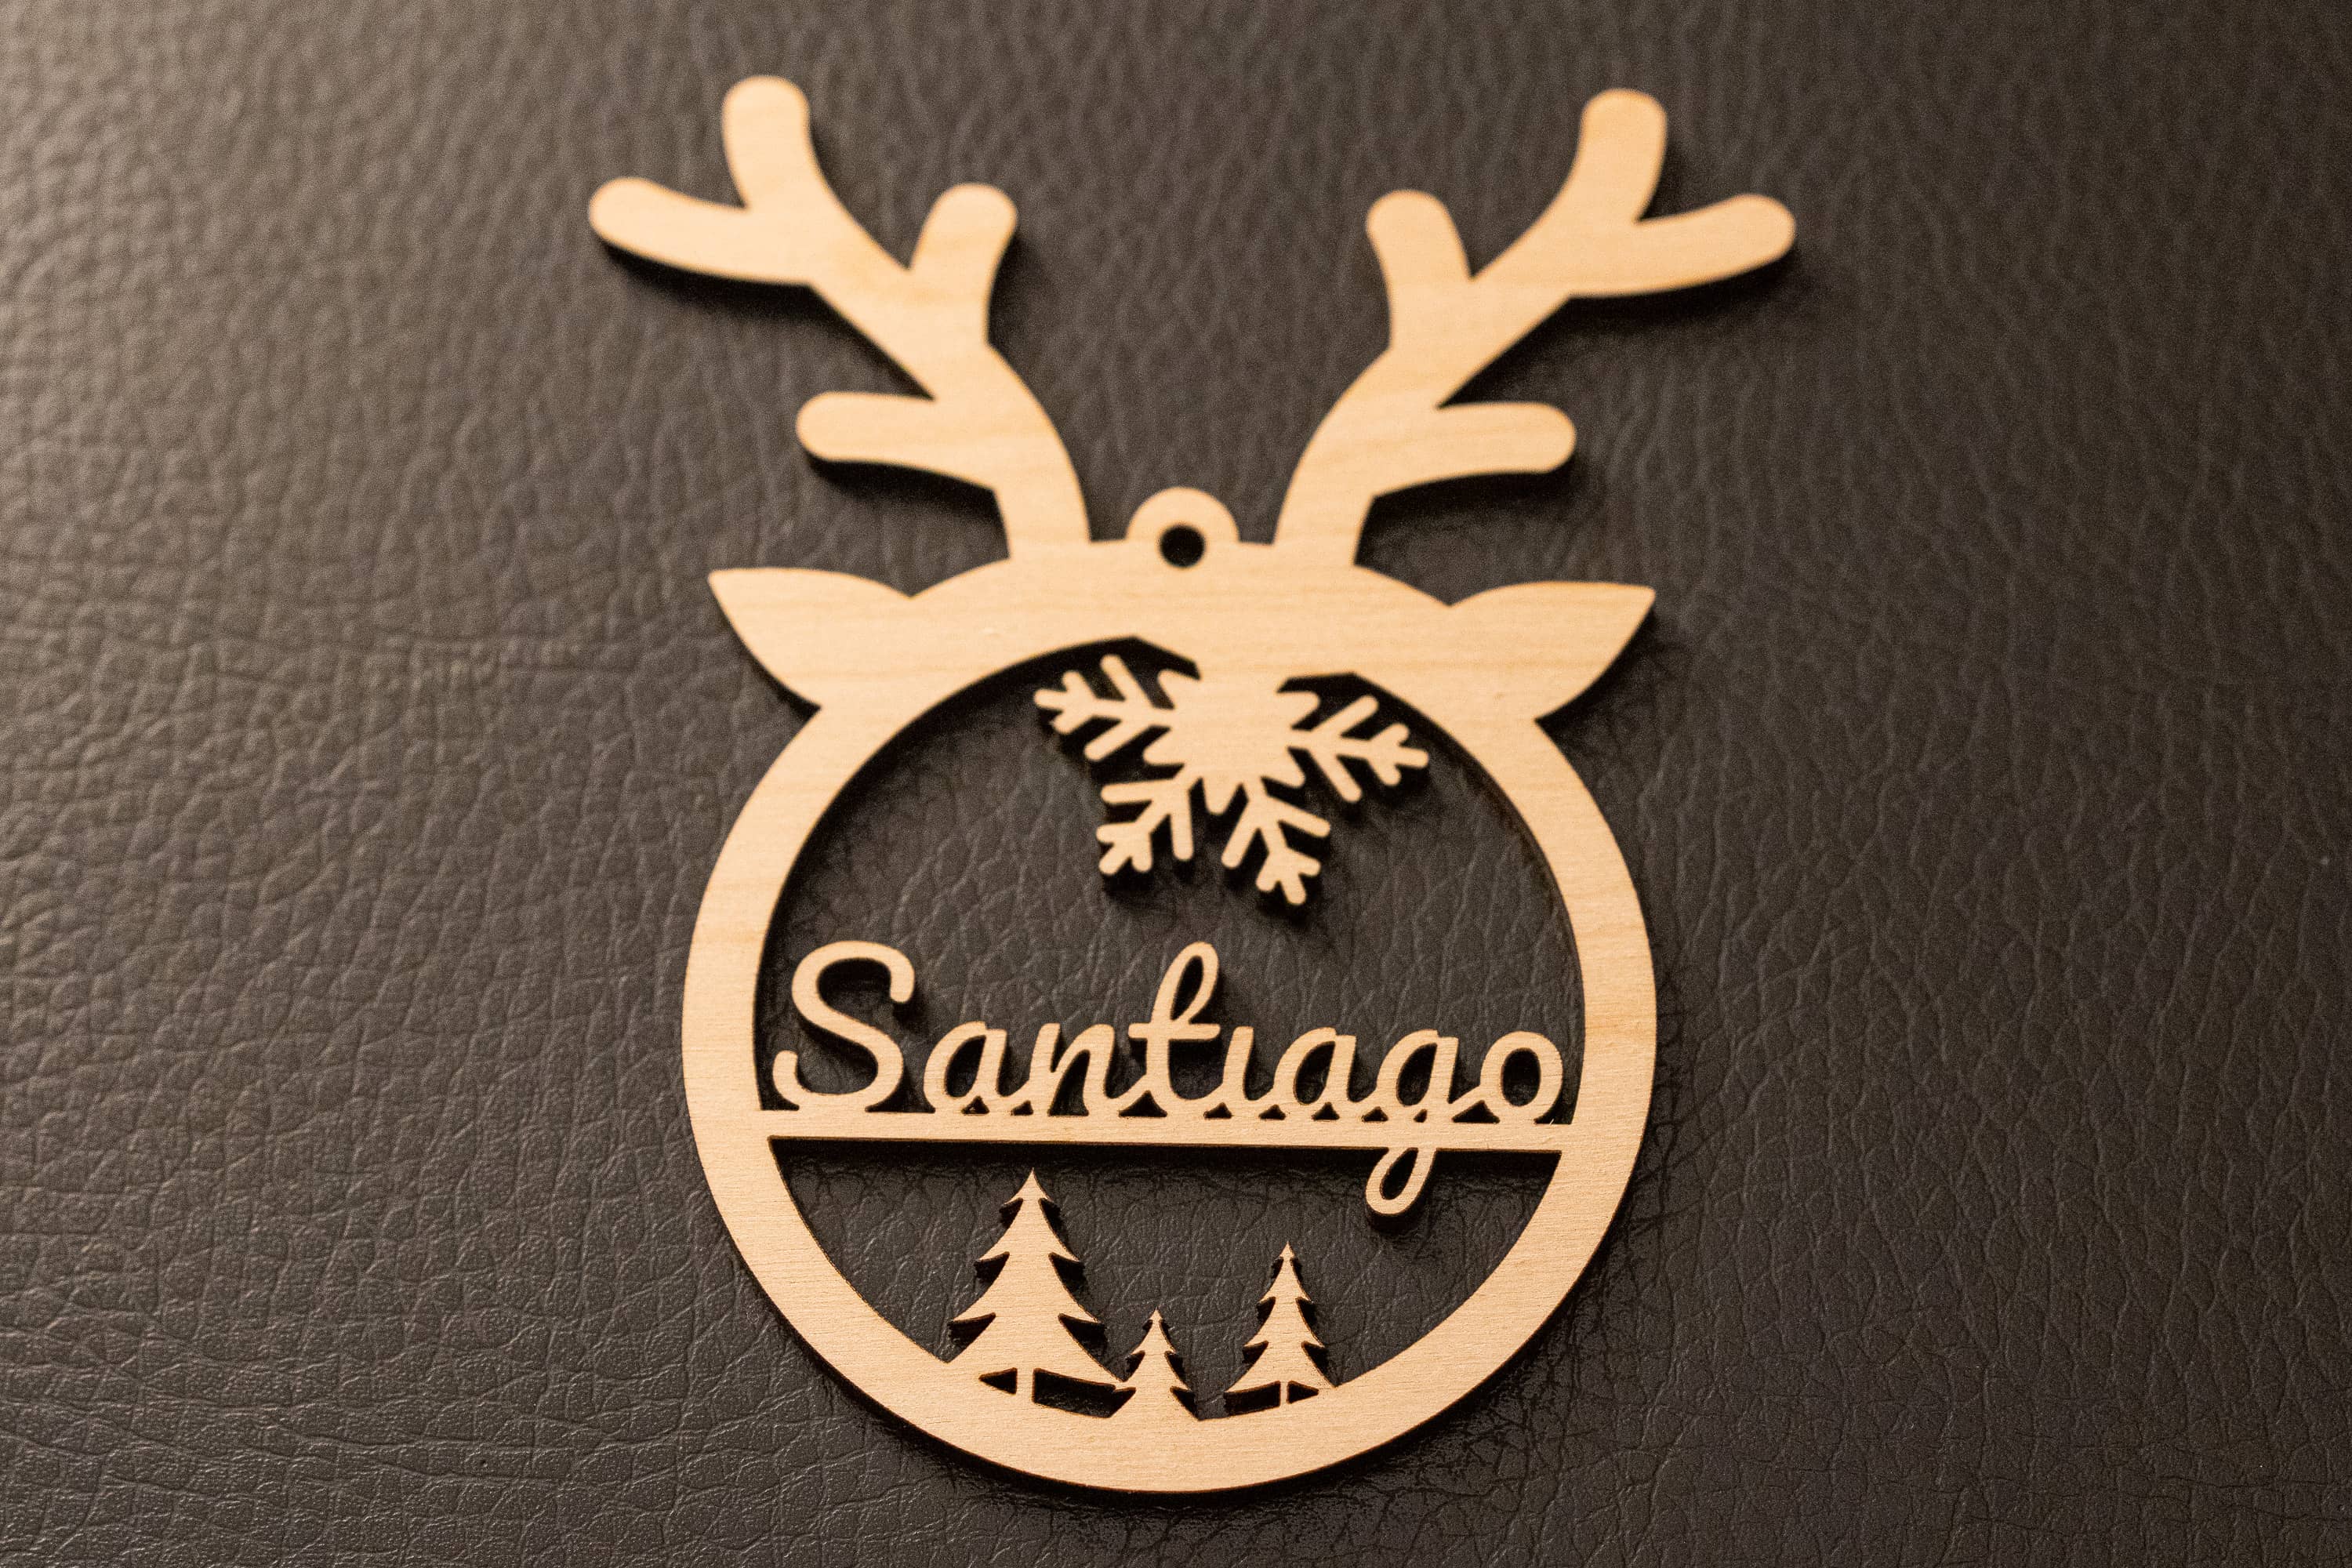 Photo of the named ornament cut out of plywood